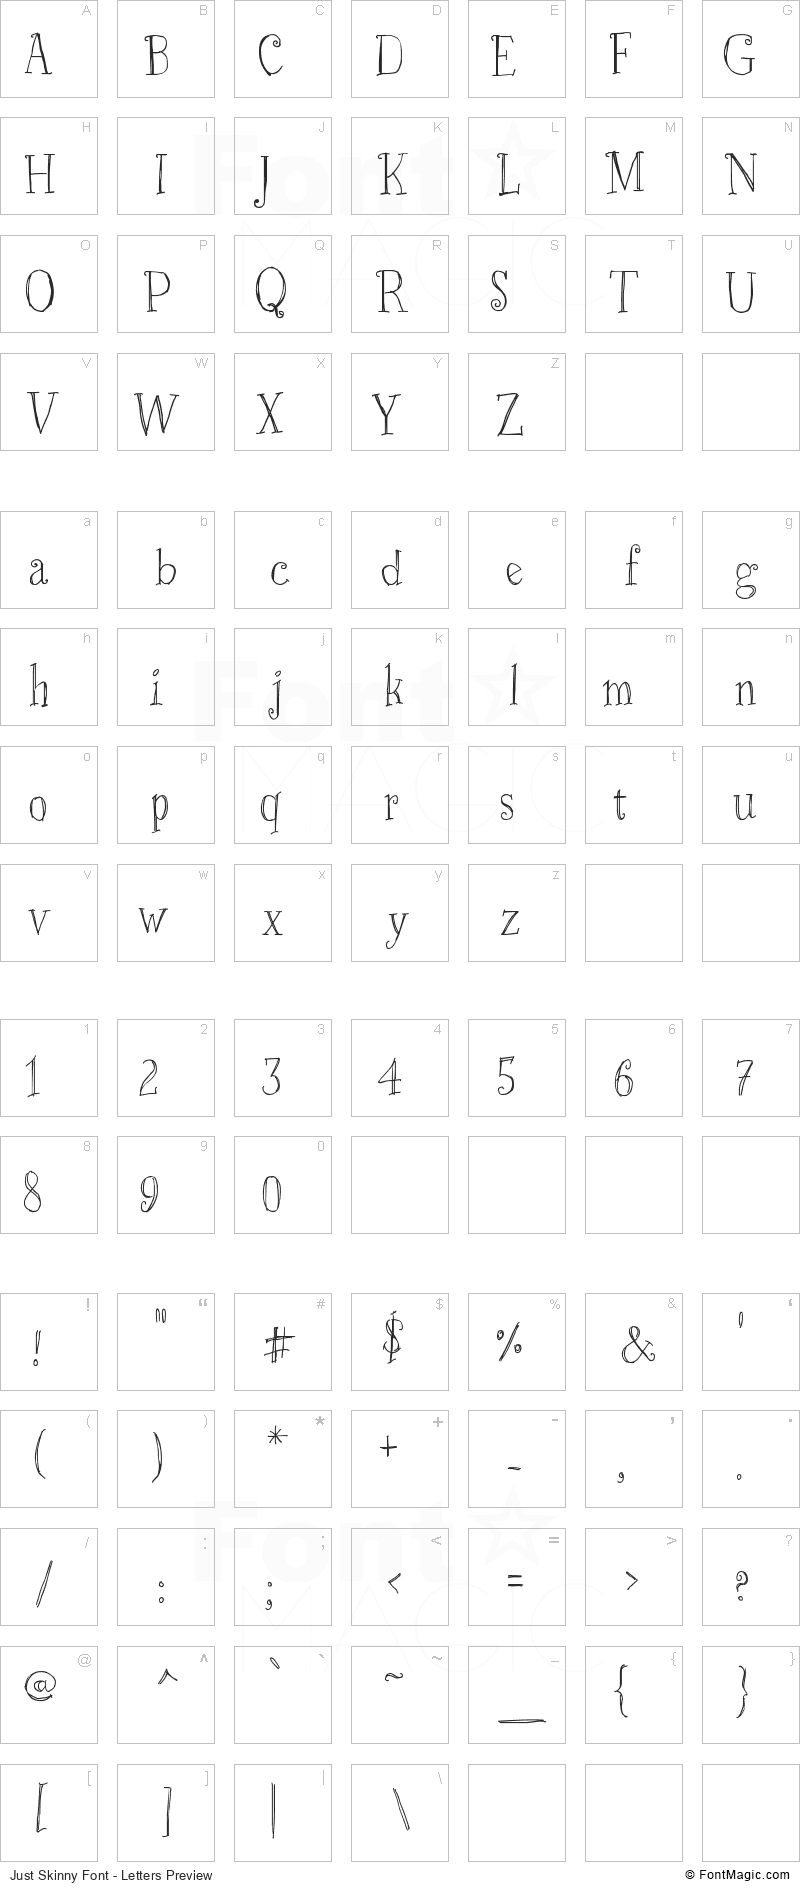 Just Skinny Font - All Latters Preview Chart